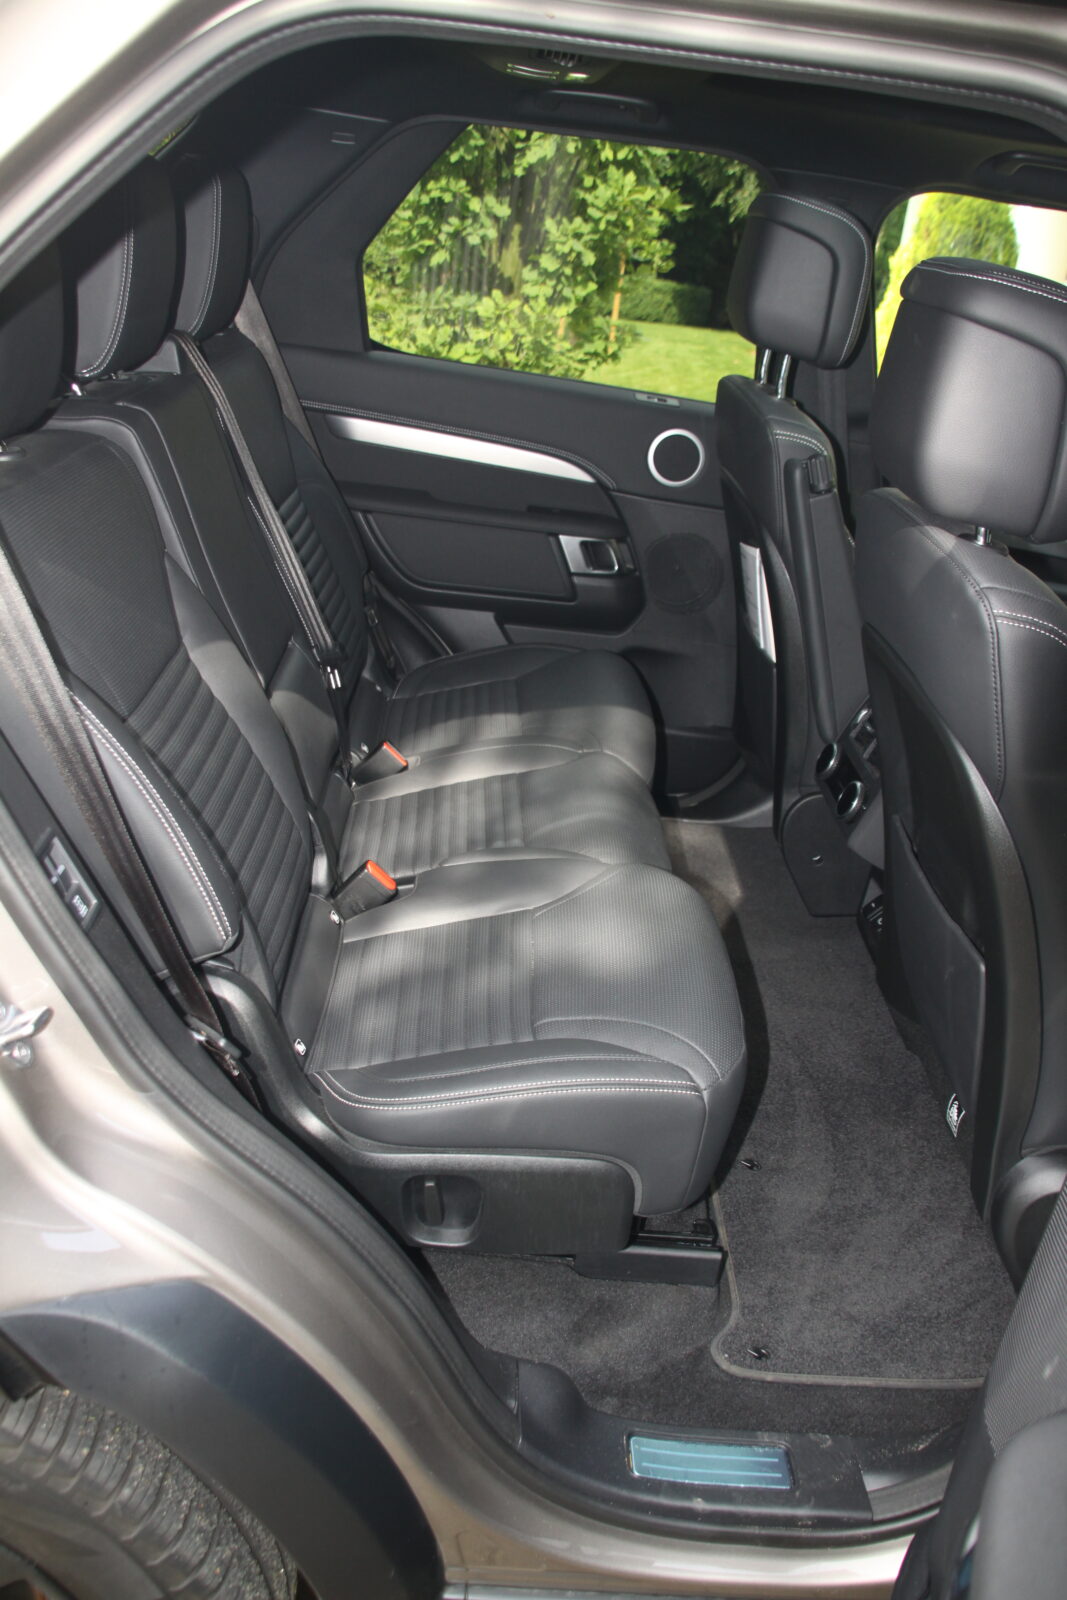 Land Rover Discovery rear seats